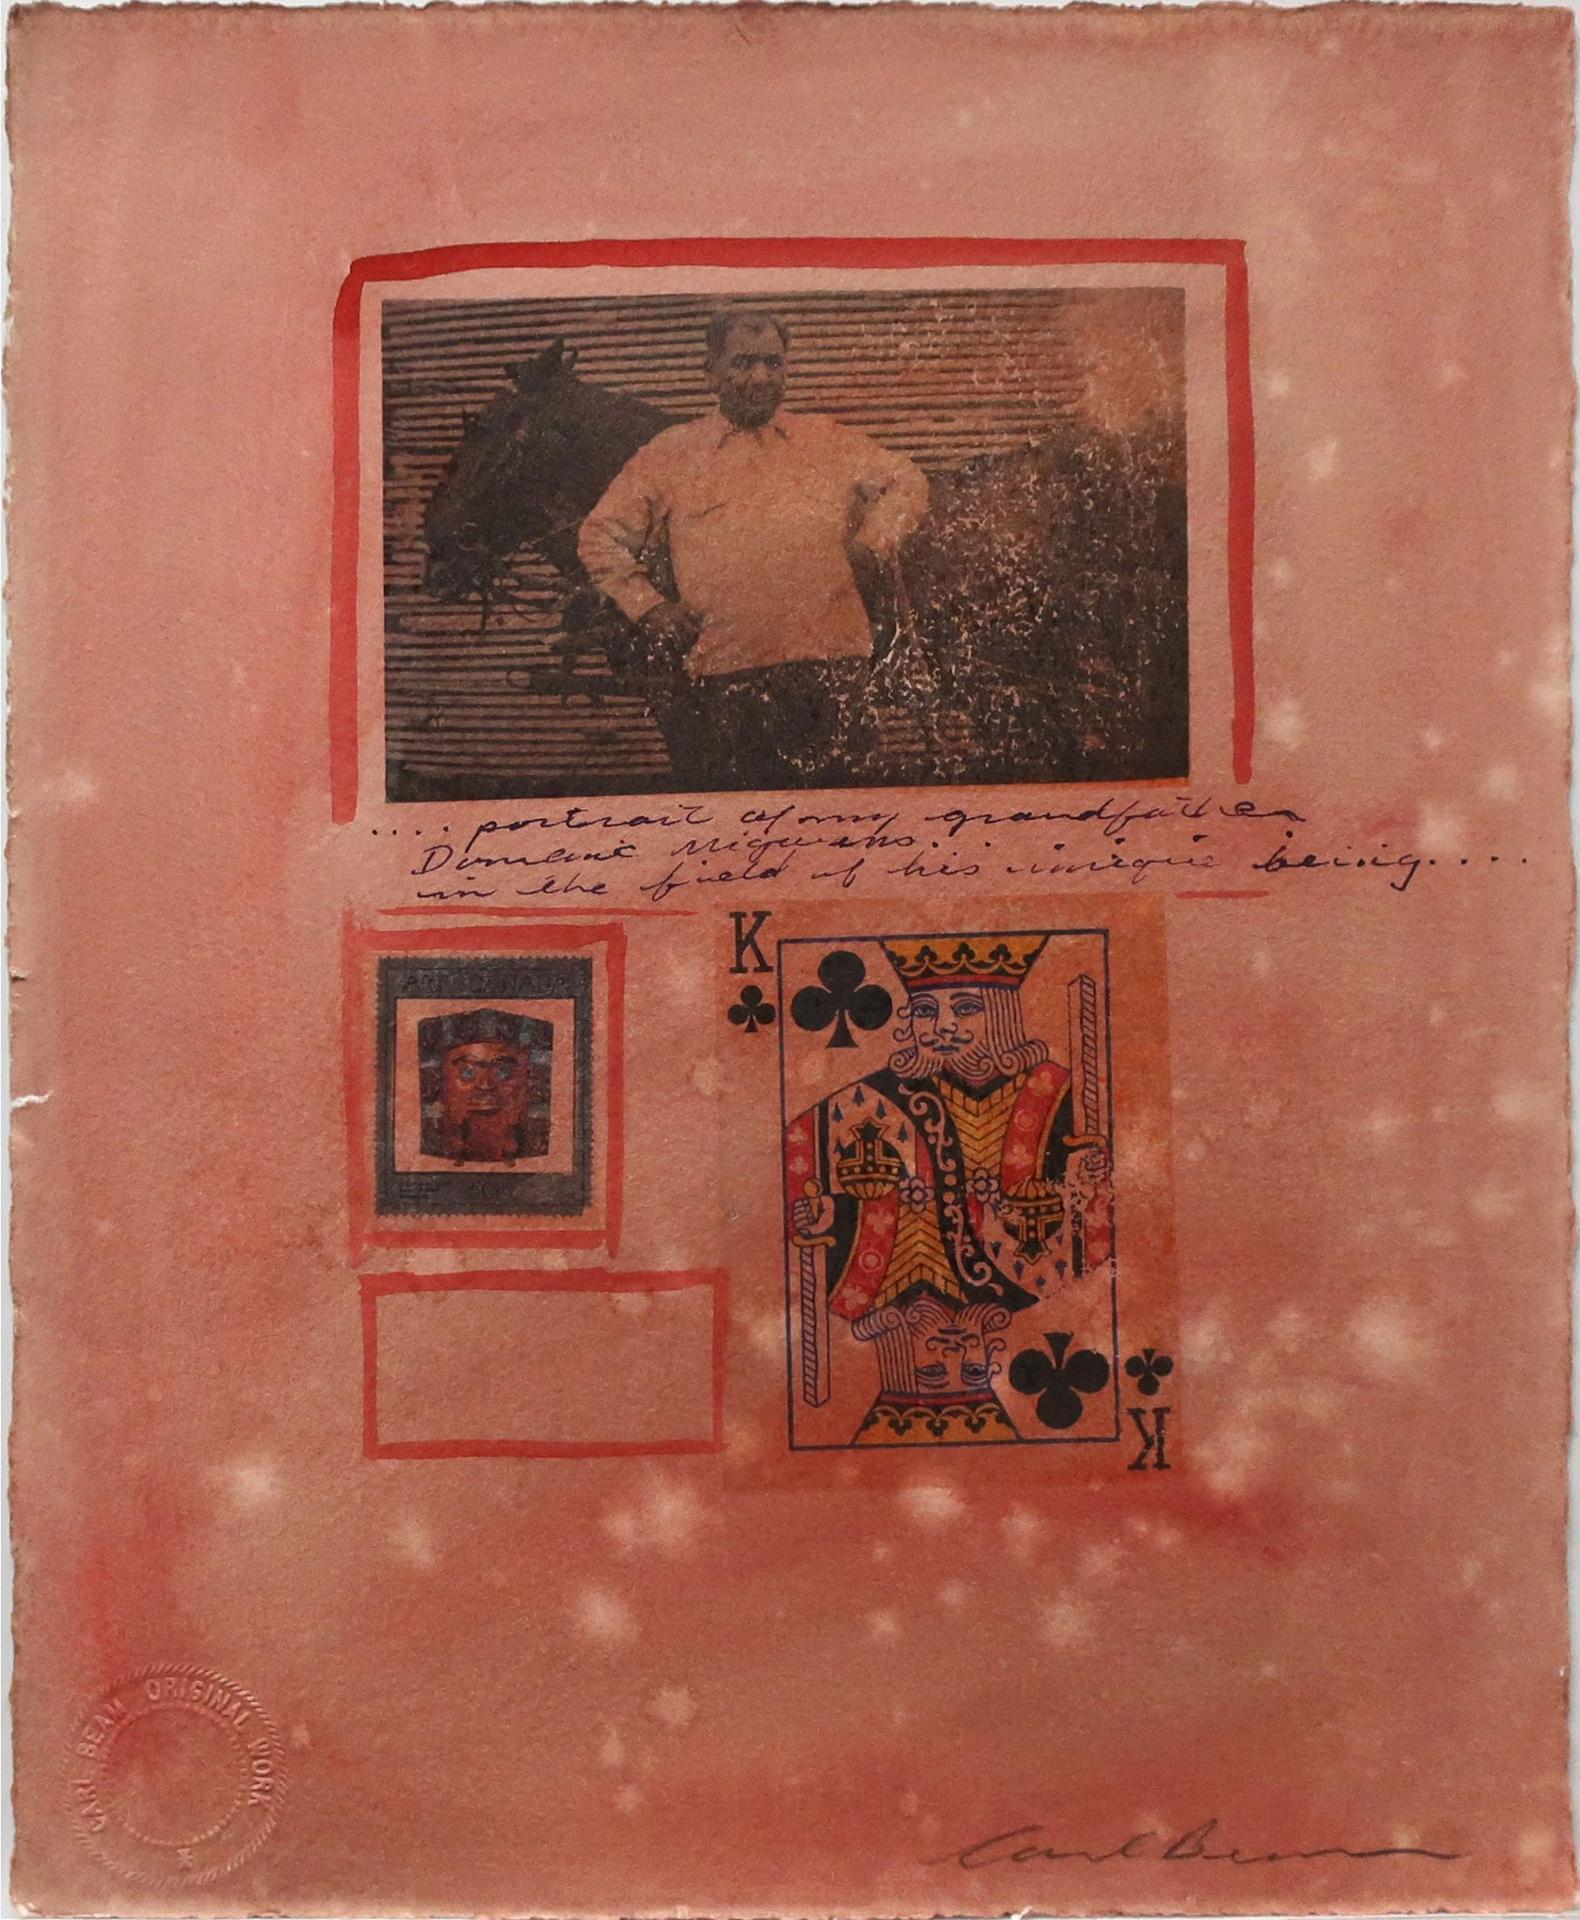 Carl Beam (1943-2005) - Portrait Of My Grandfather Dominic Nigwans (King Of Clubs)